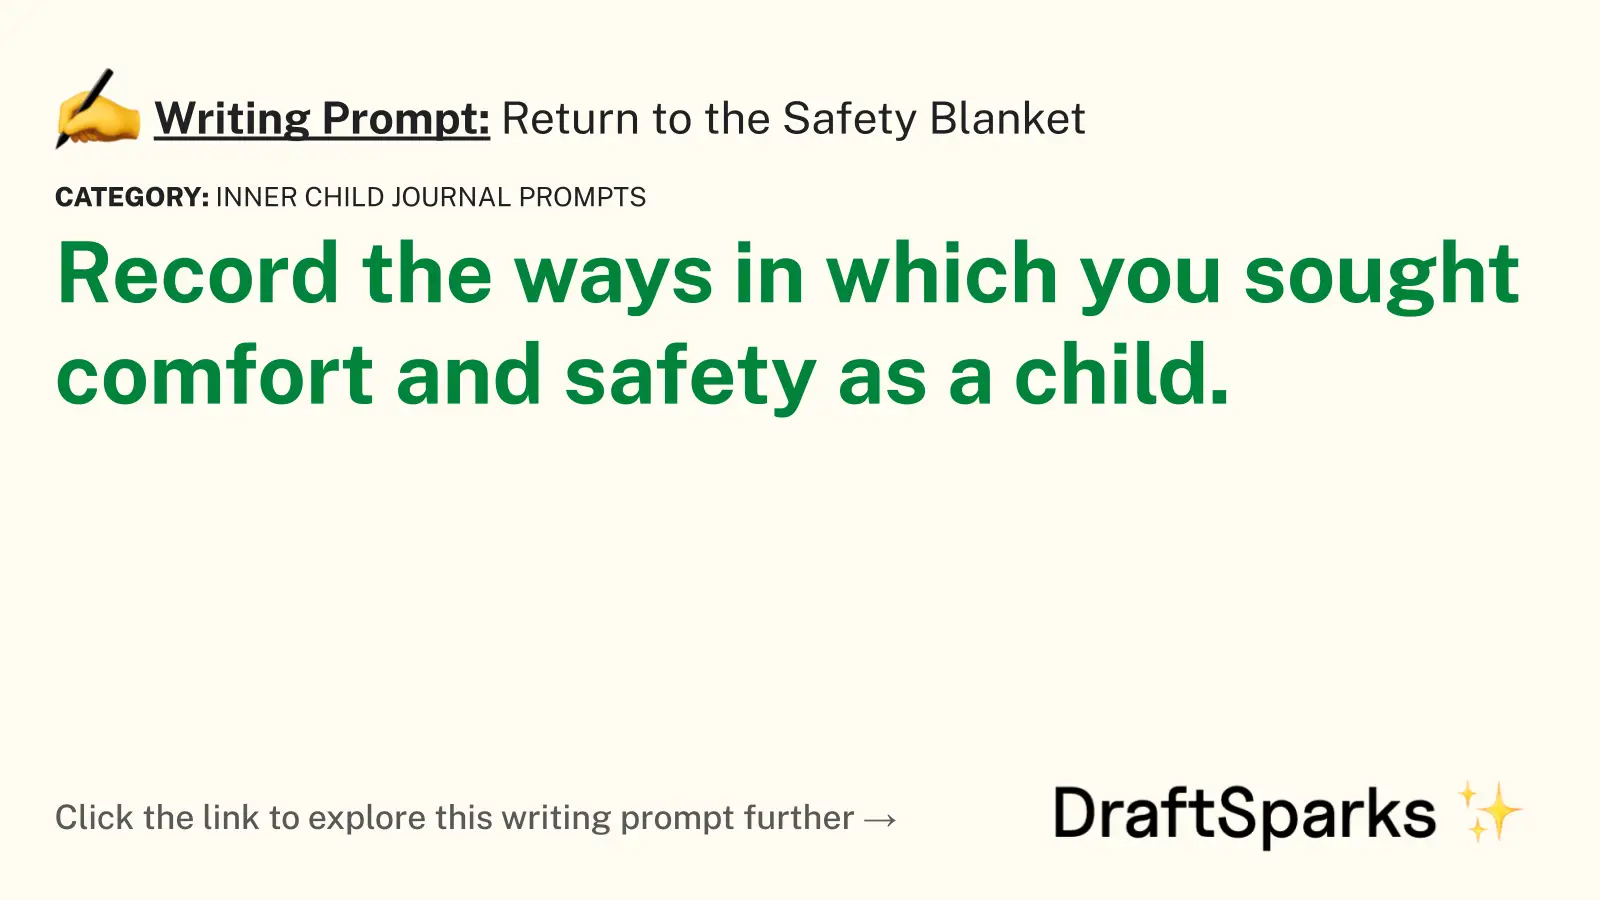 Return to the Safety Blanket